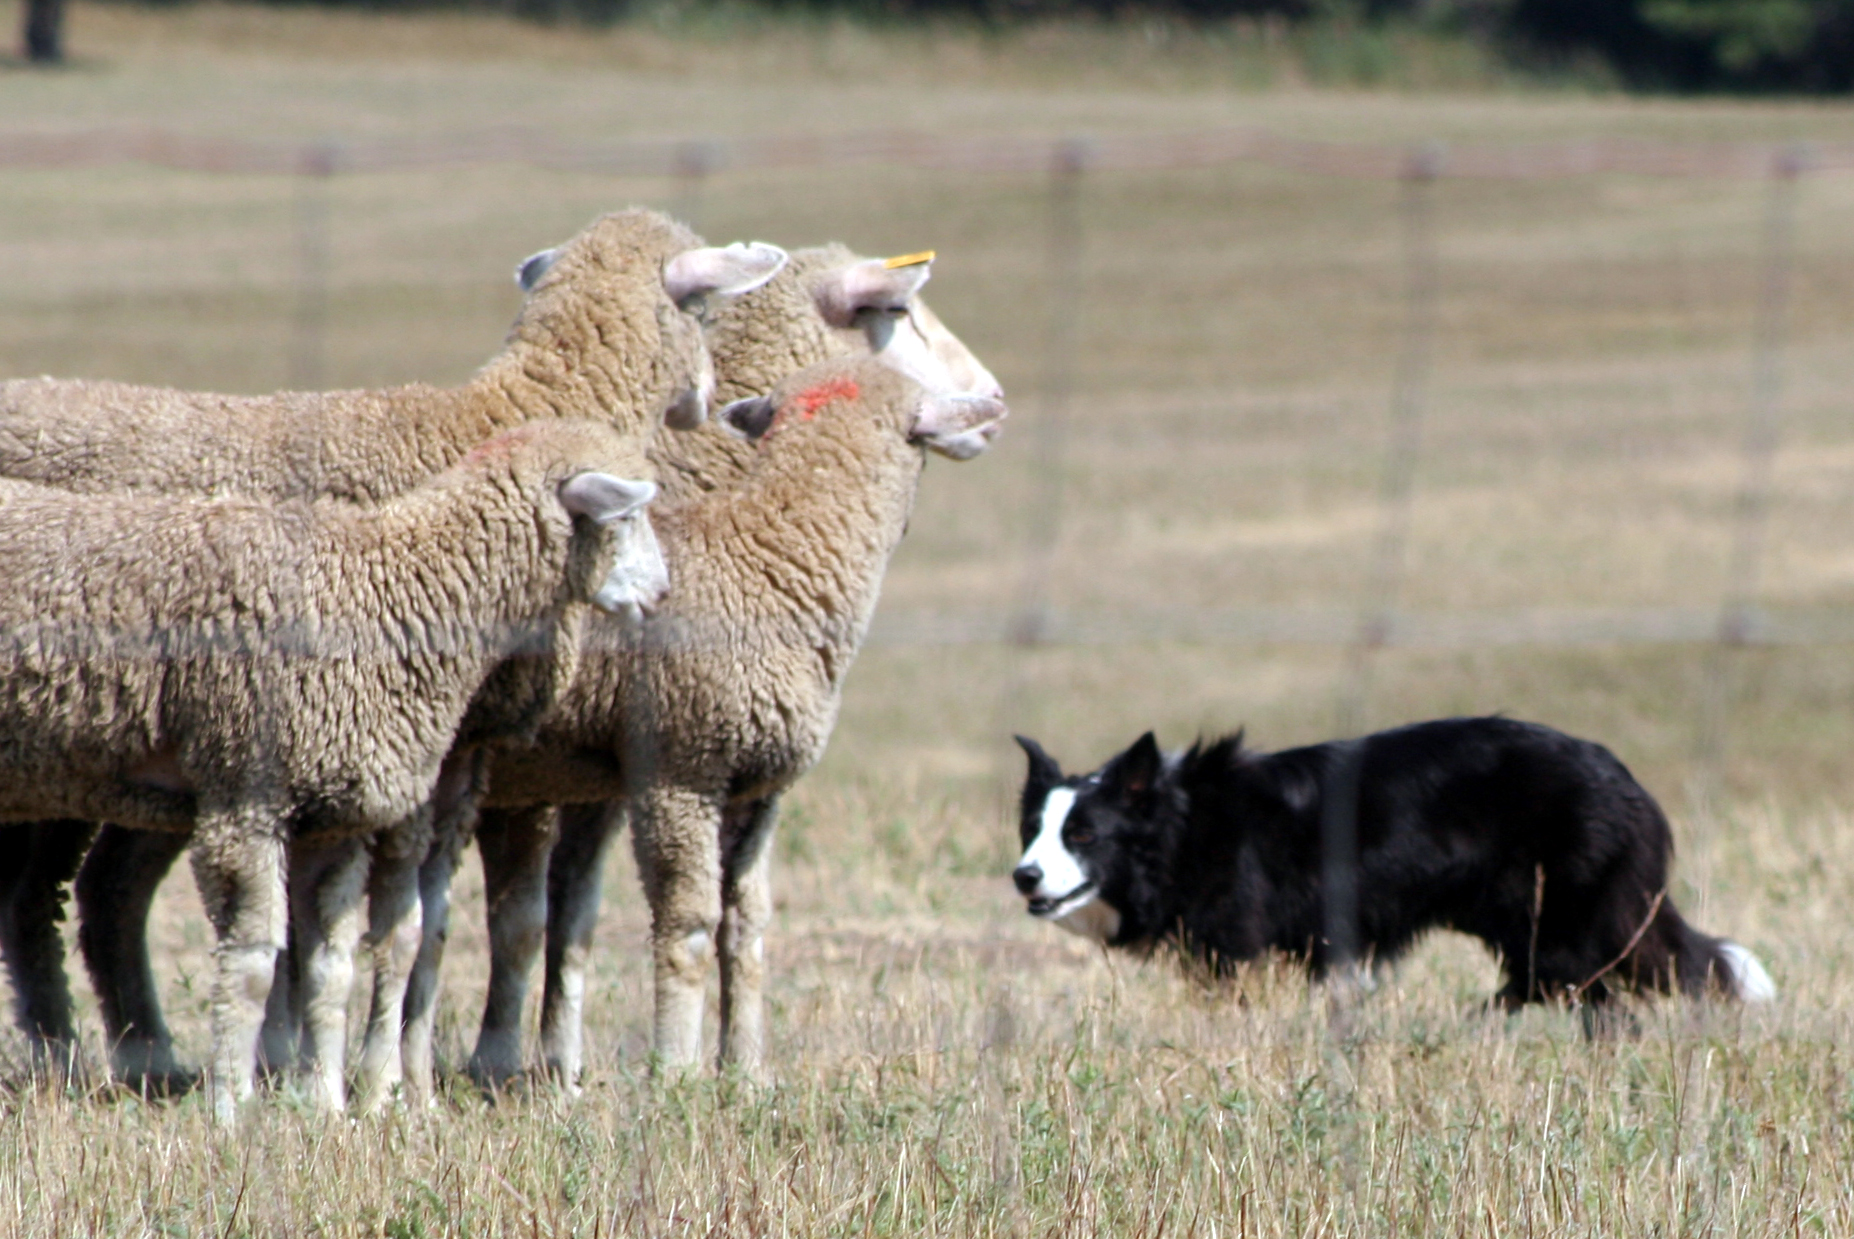 how to keep a herding dog happy